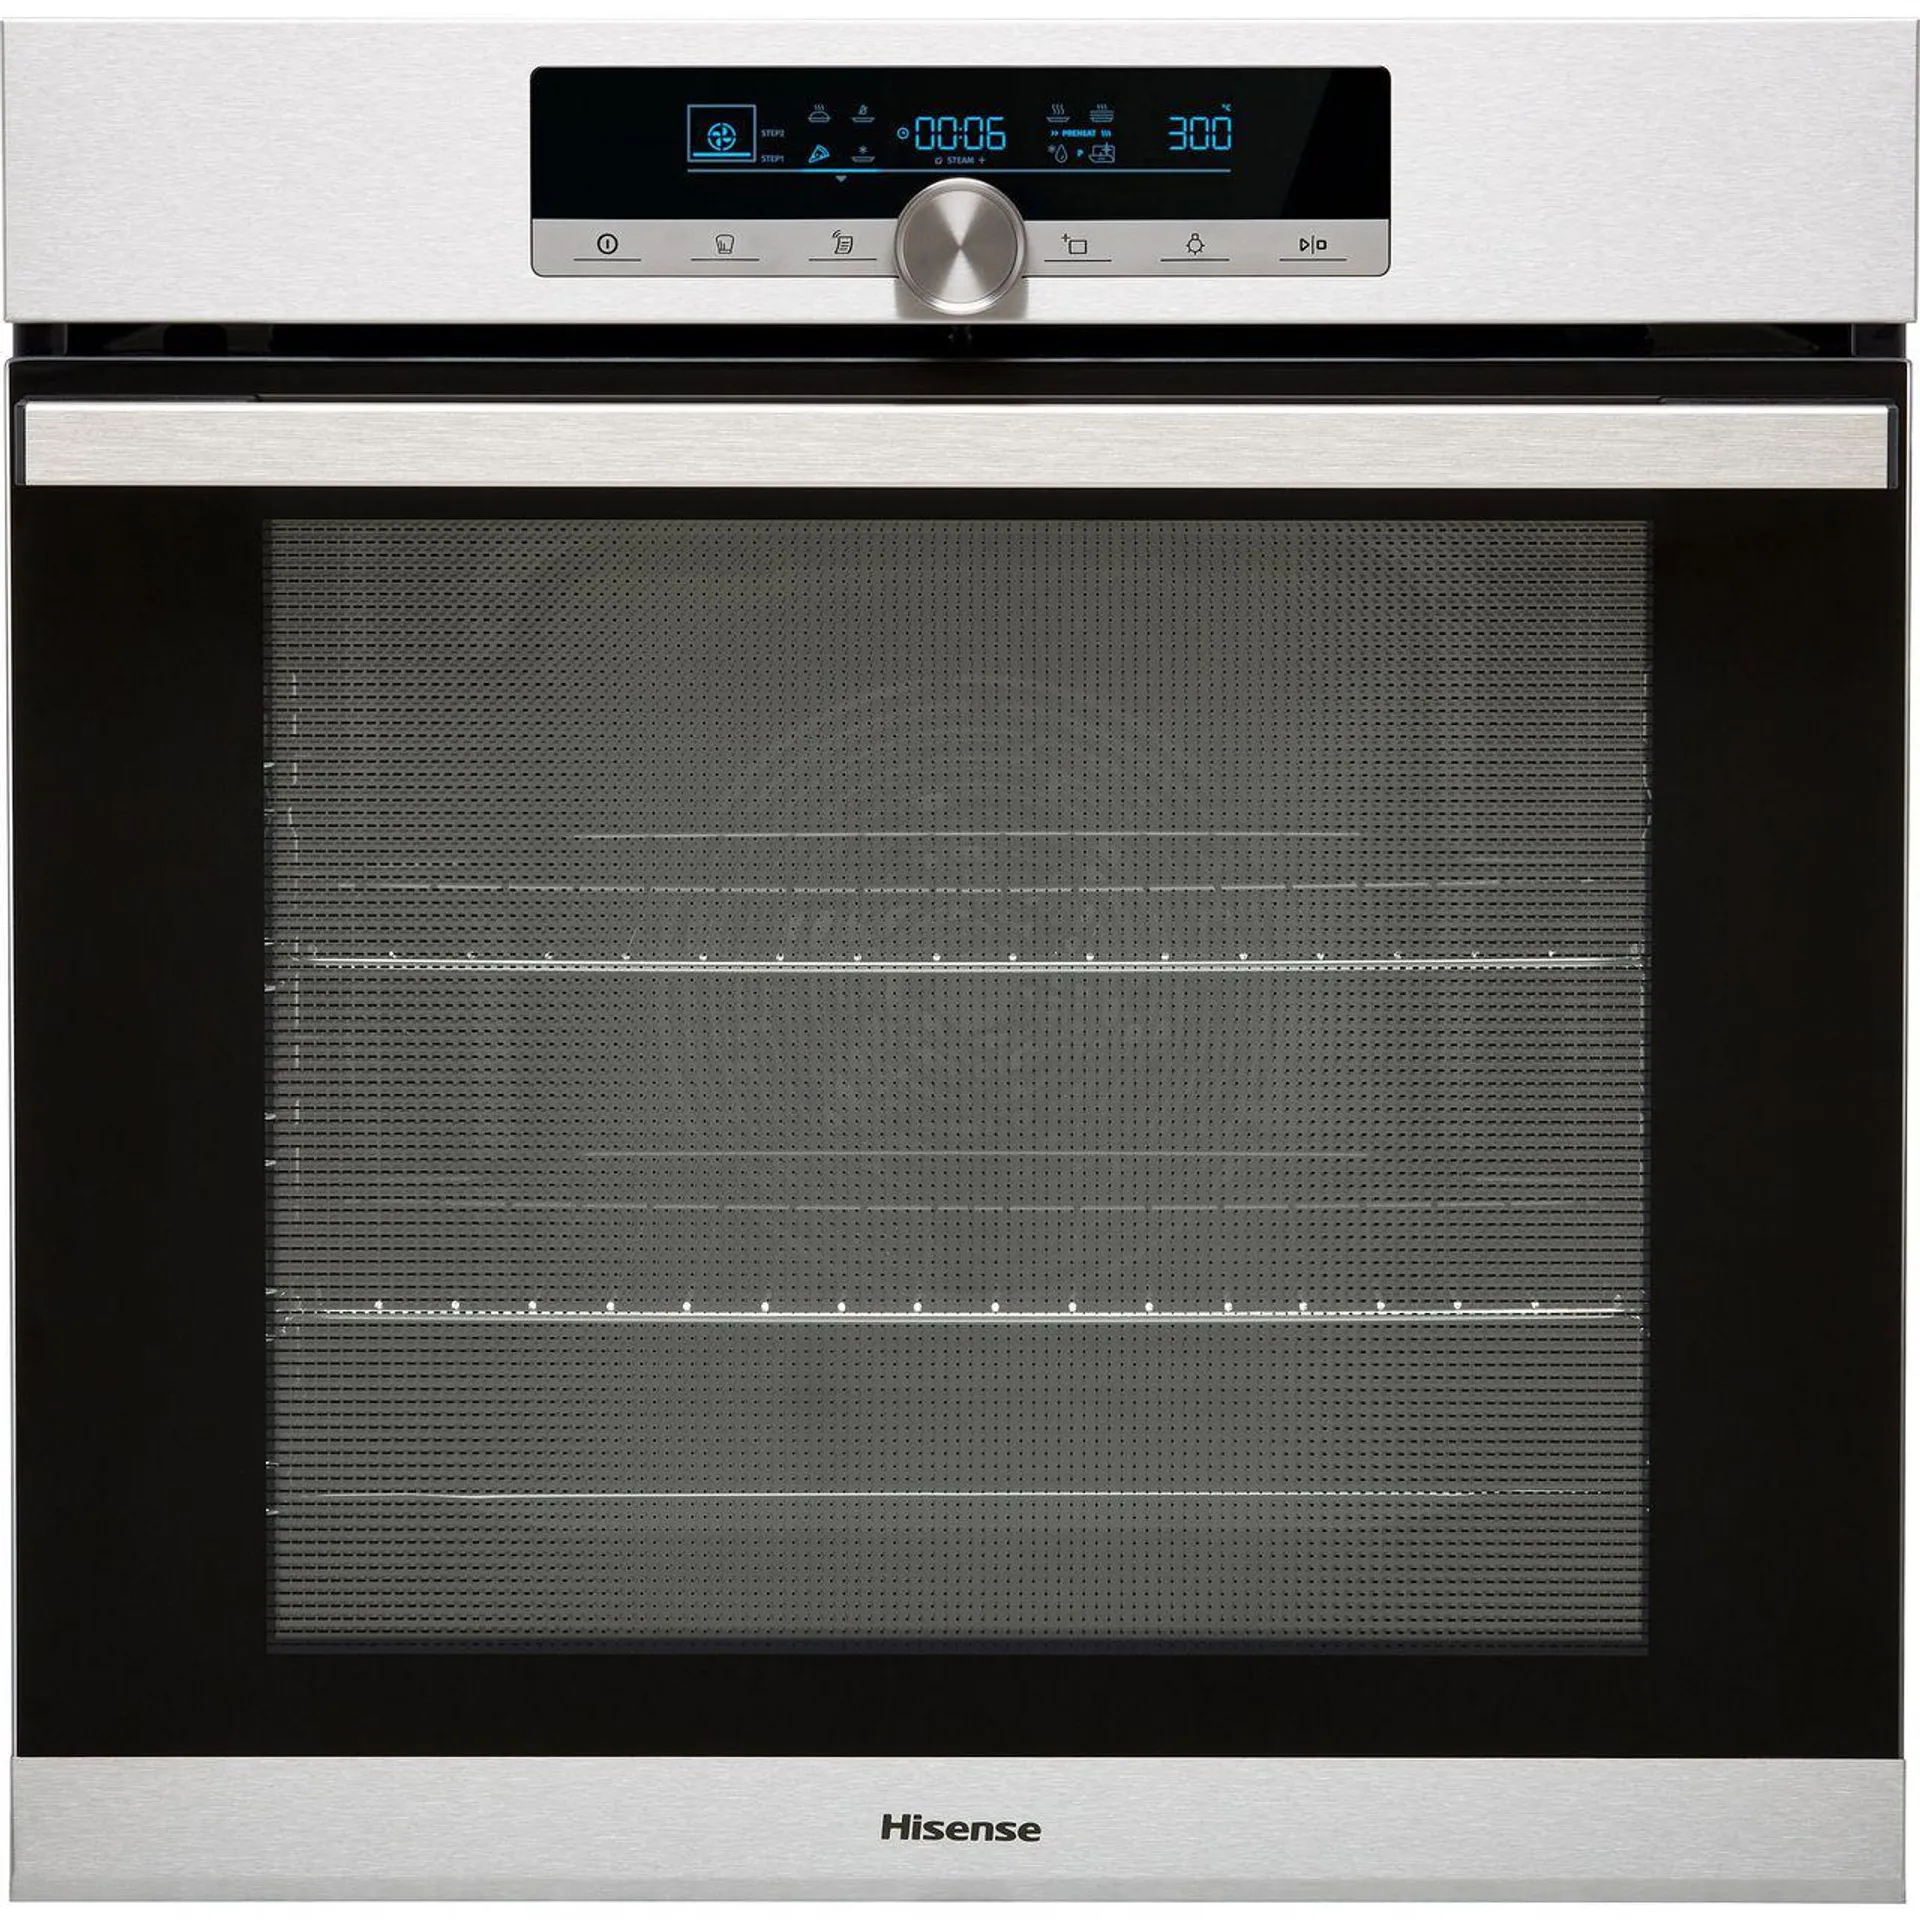 Hisense BSA65332AX Built In Electric Single Oven - Stainless Steel - A+ Rated